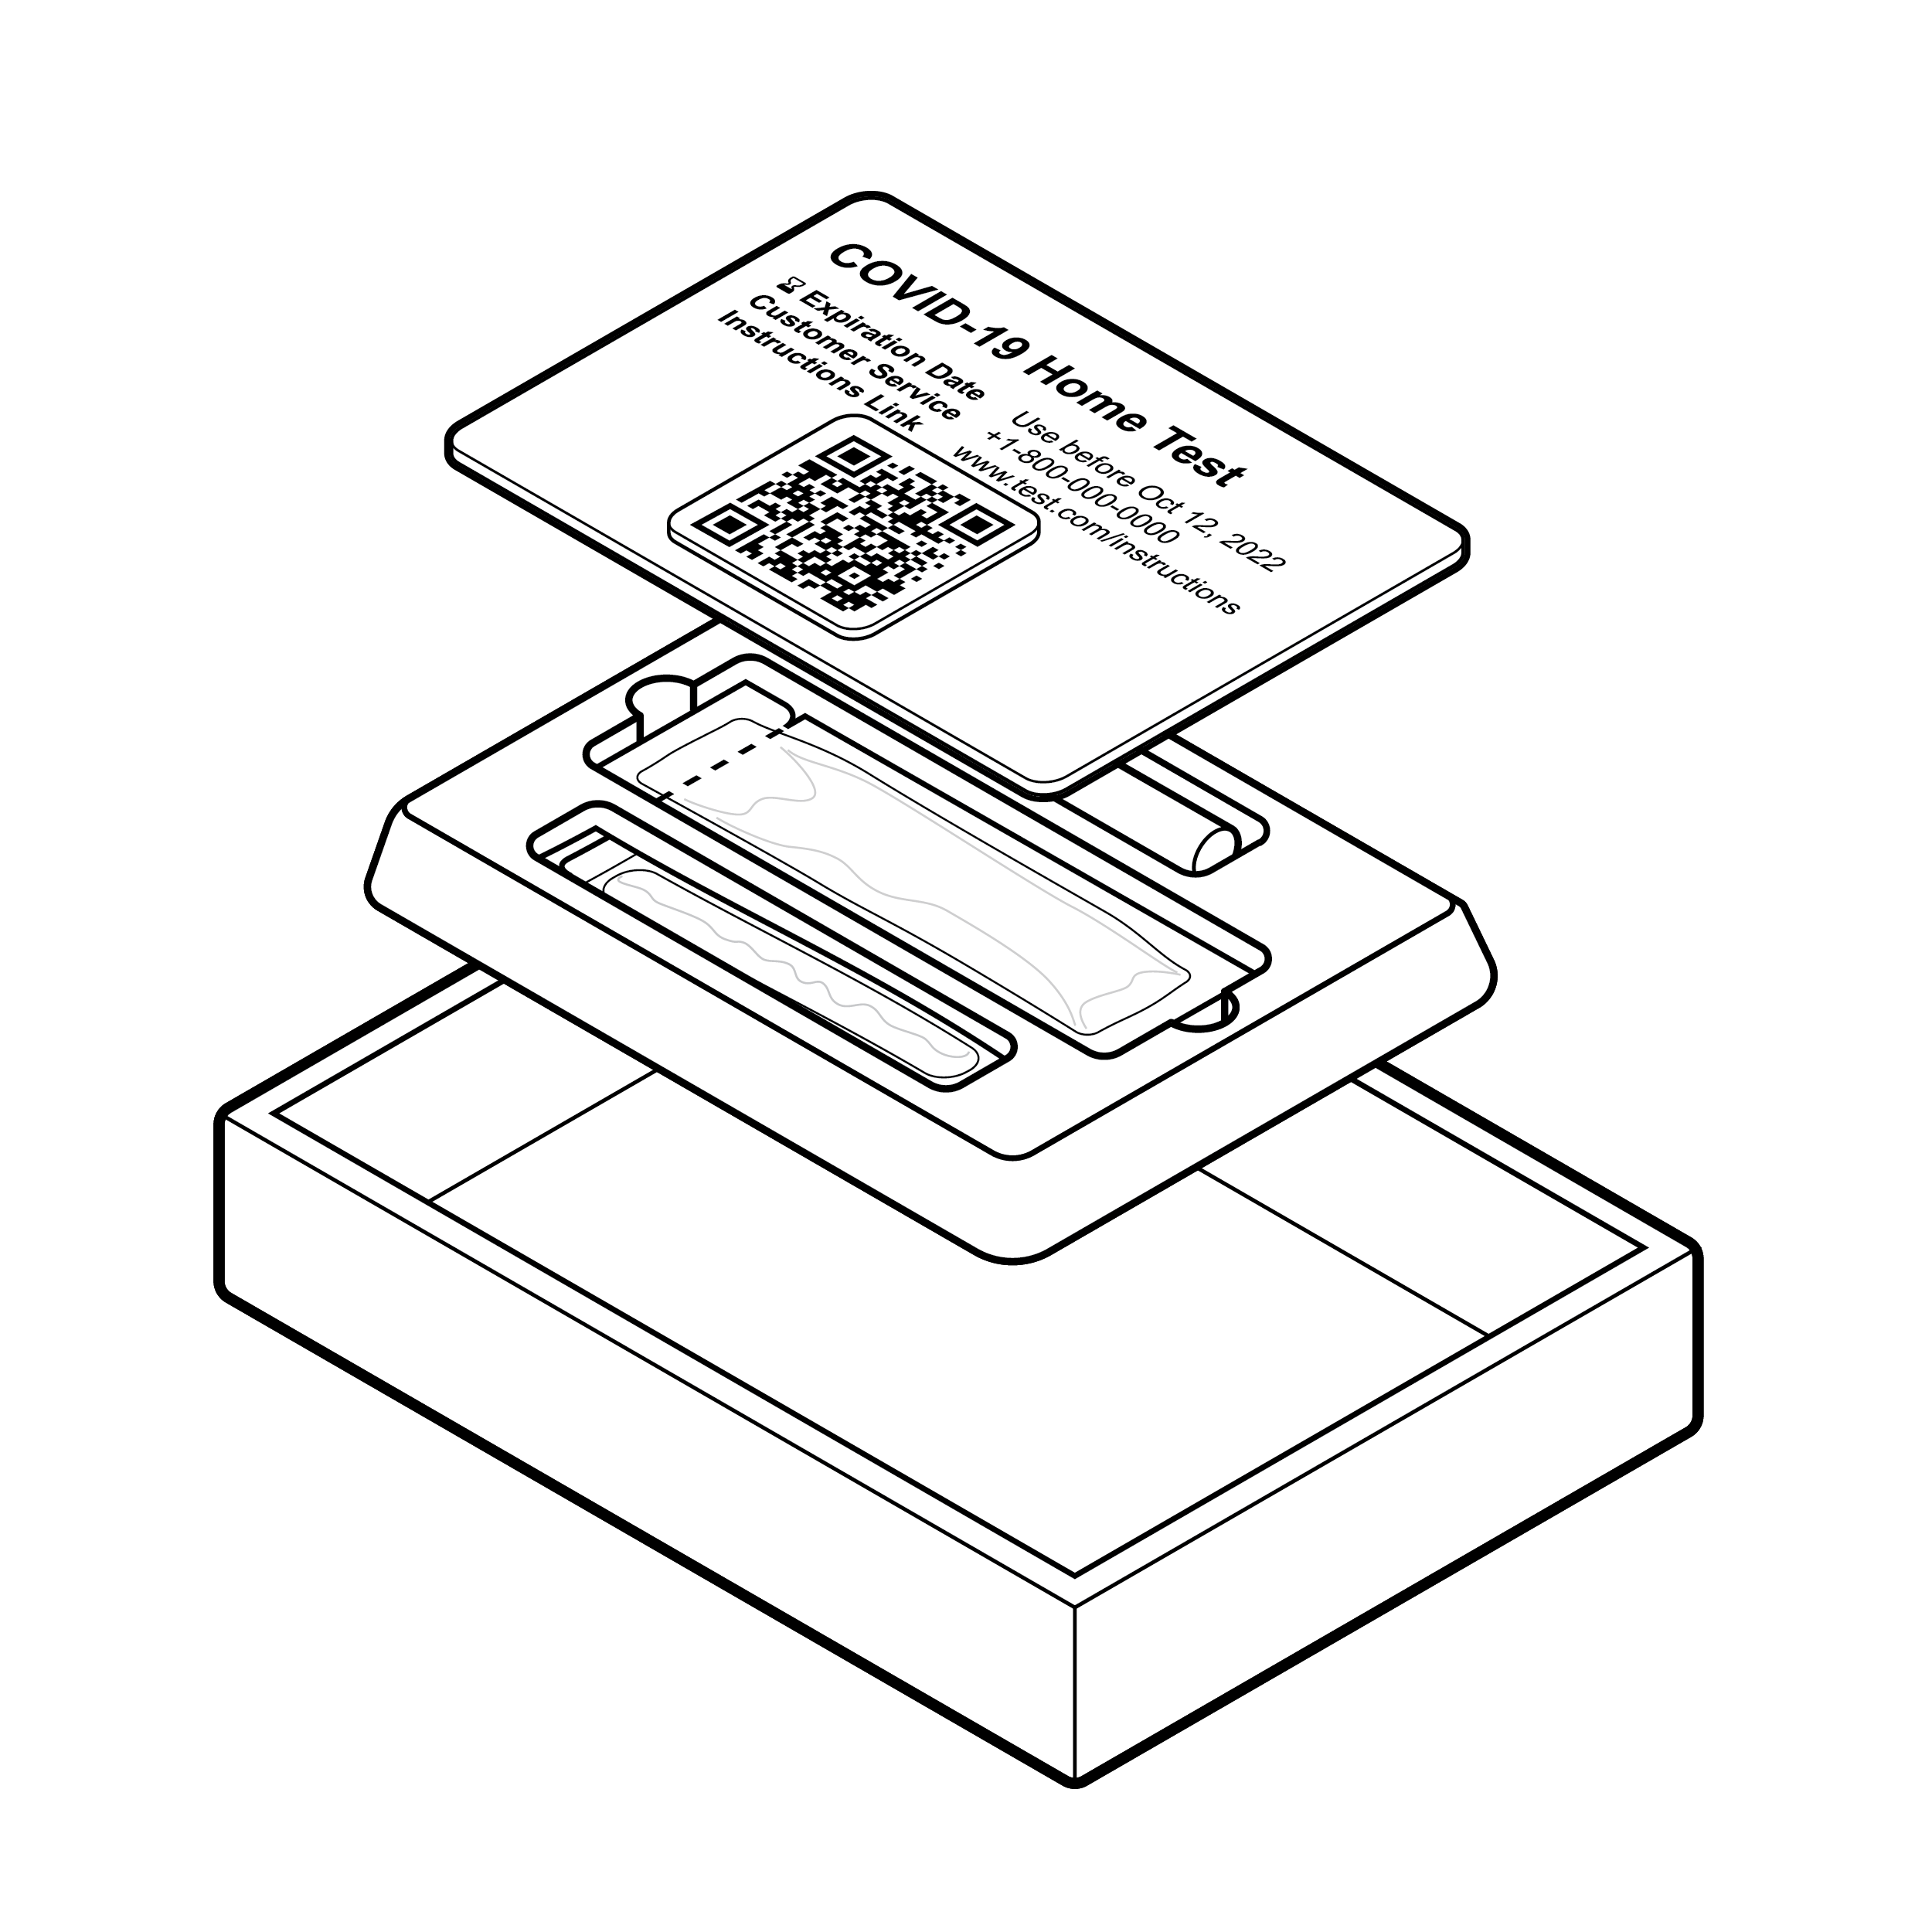 Test instructions with illustration of a test kit, with individual components displayed floating above one another.